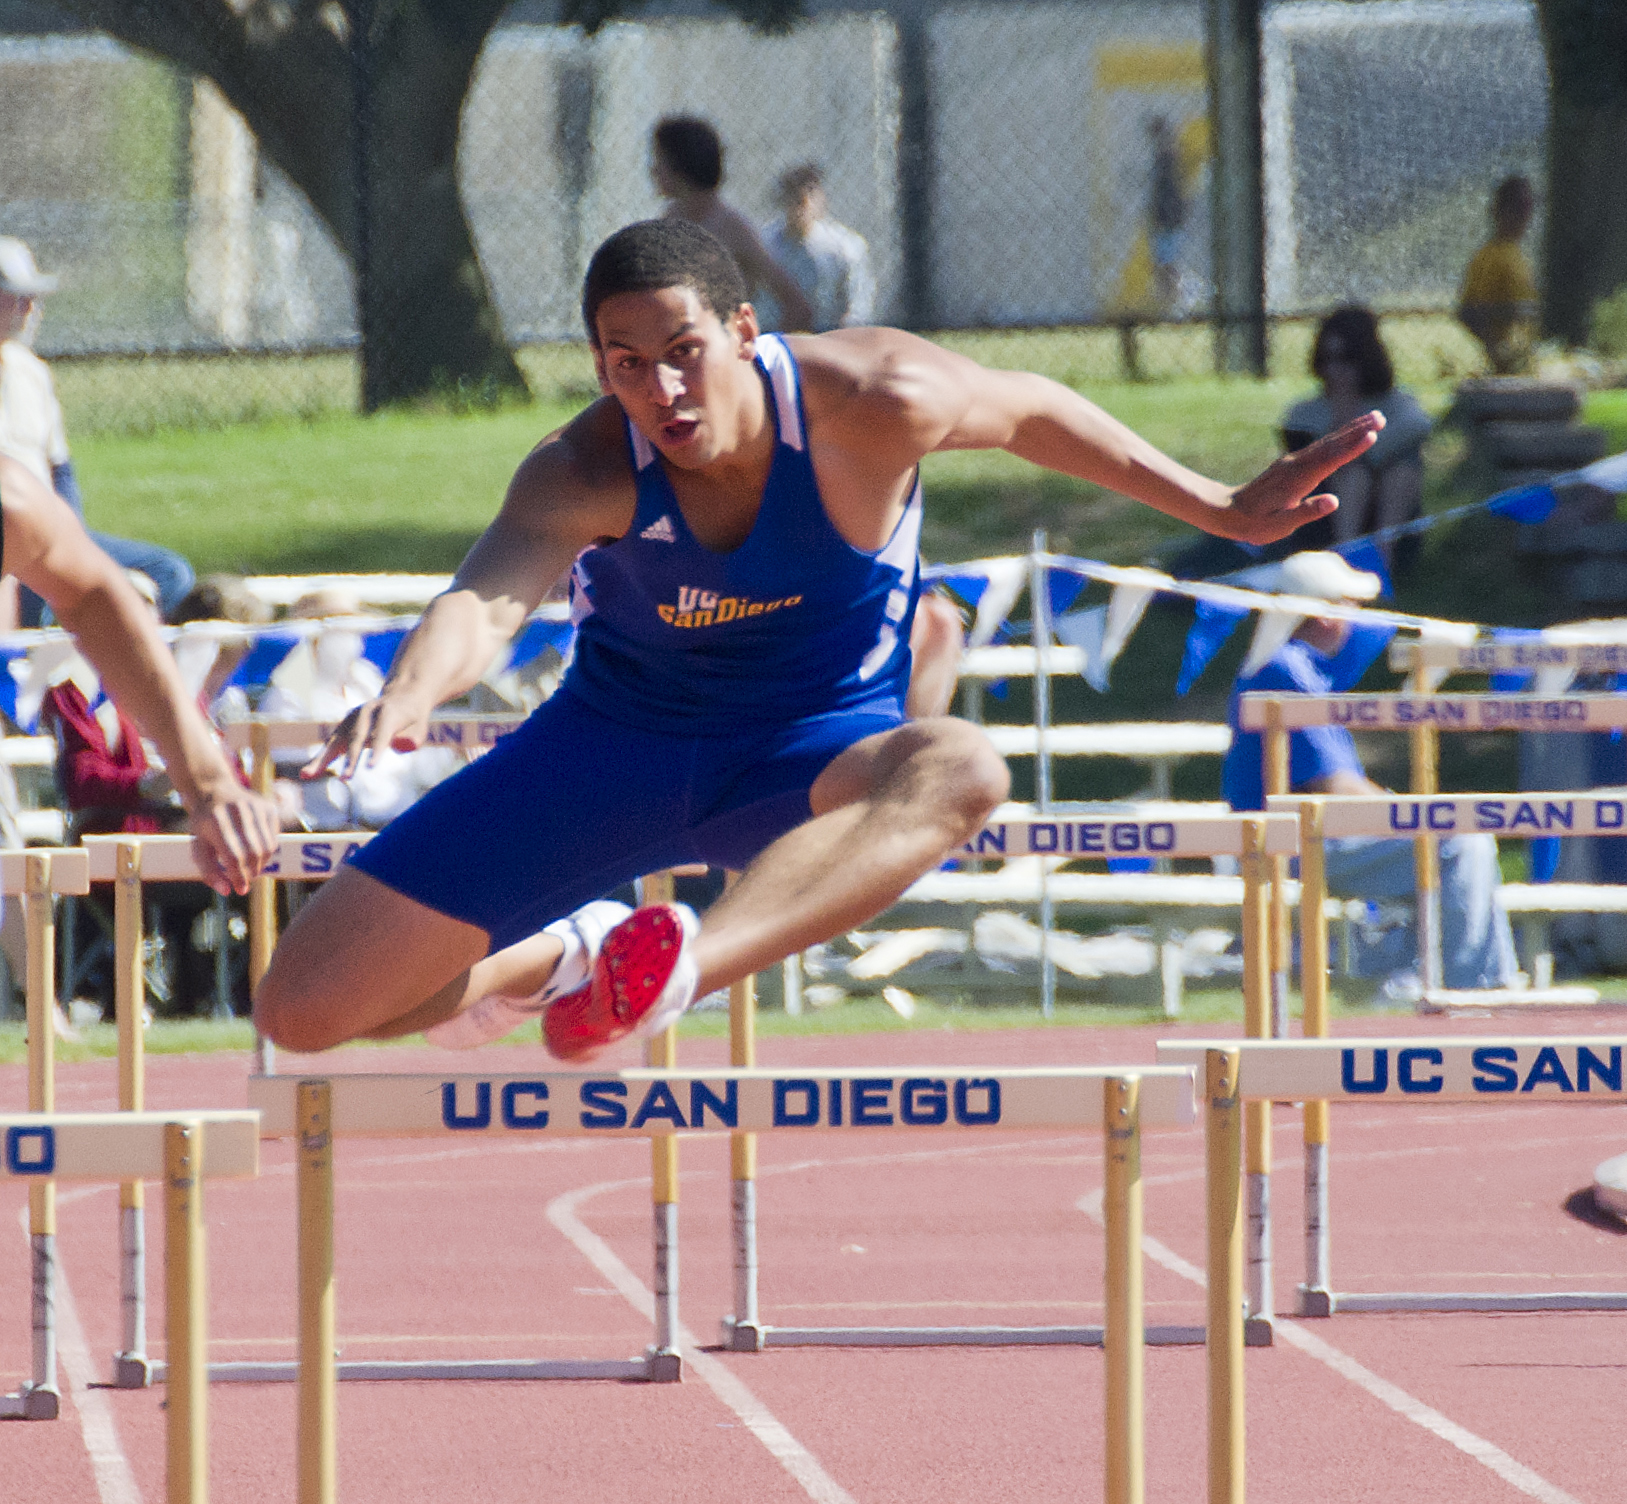 man jumping over hurdles in track and field event